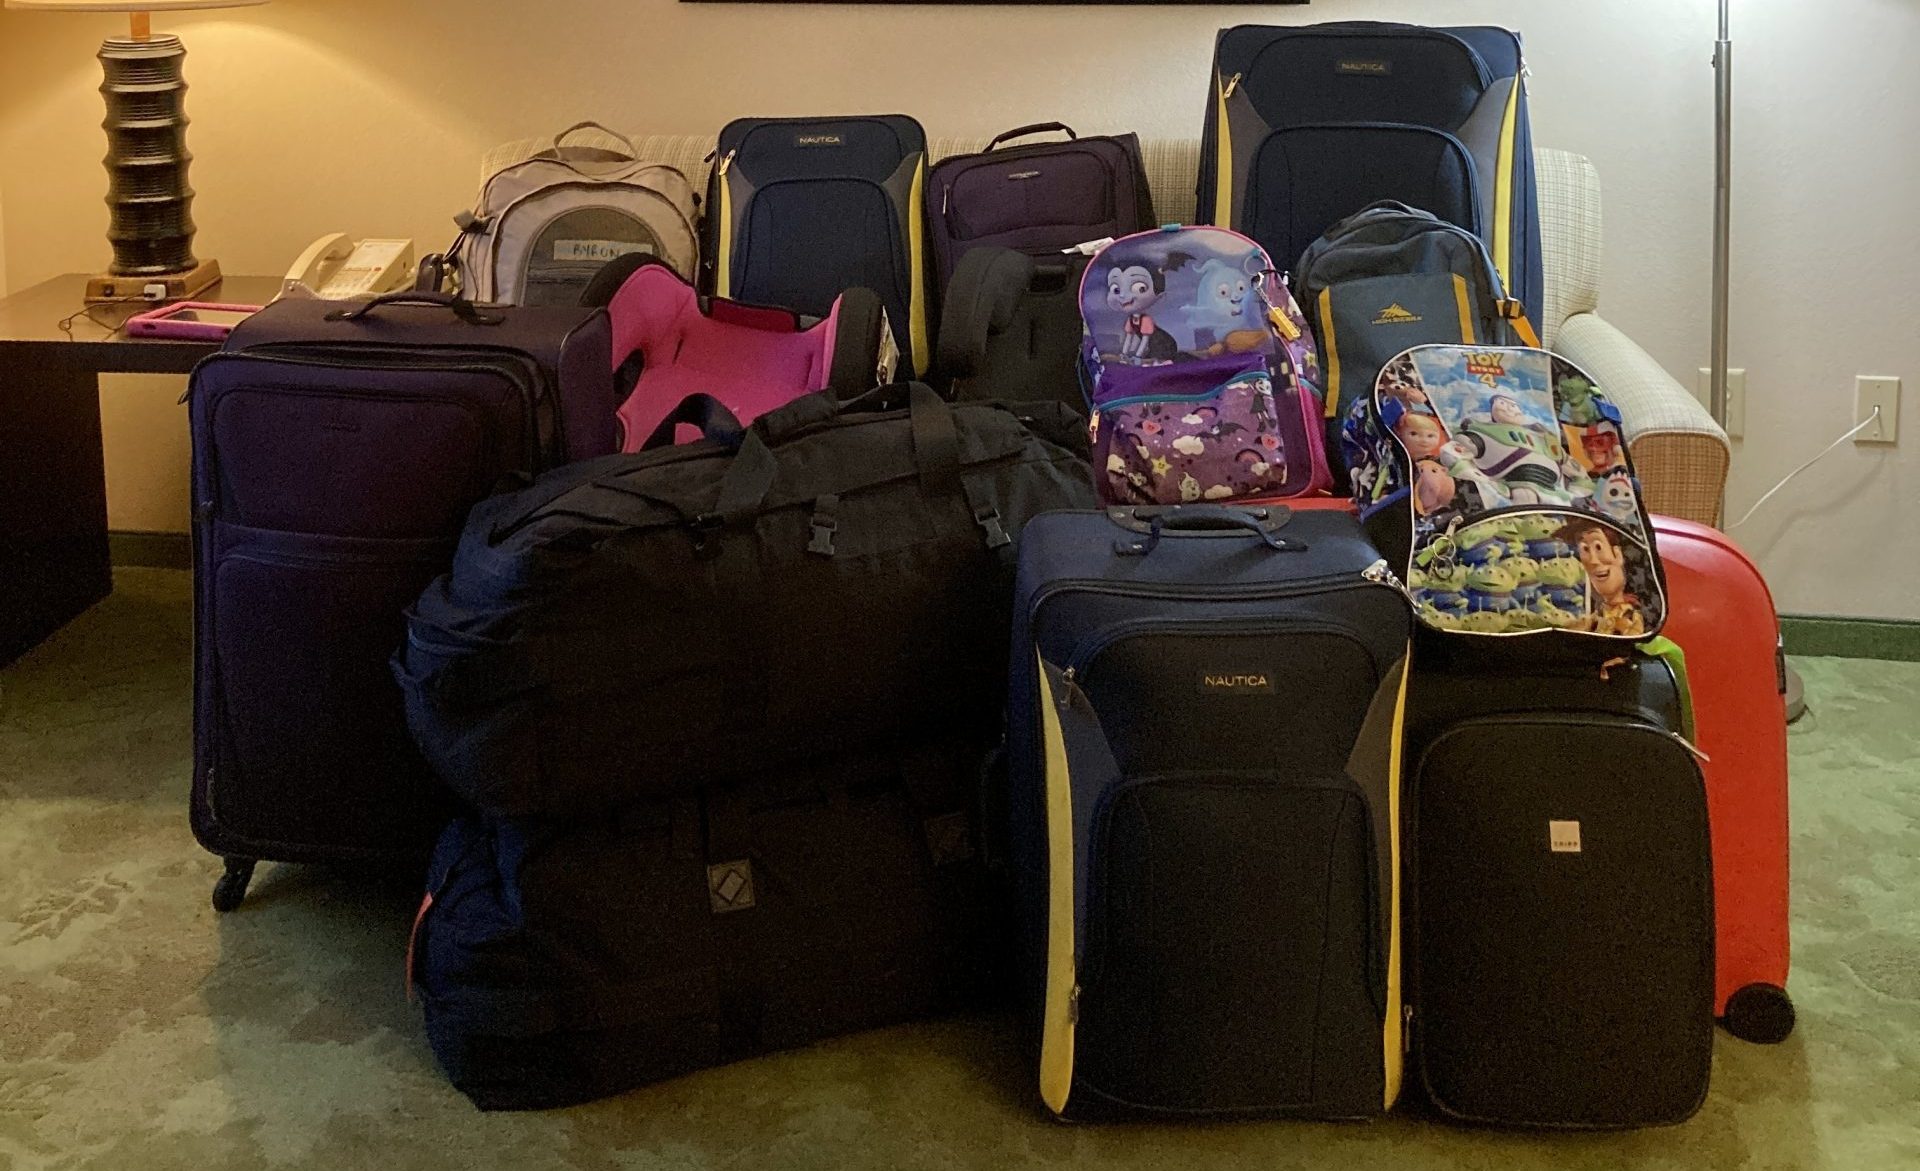 13 bags and suitcases are piled together.